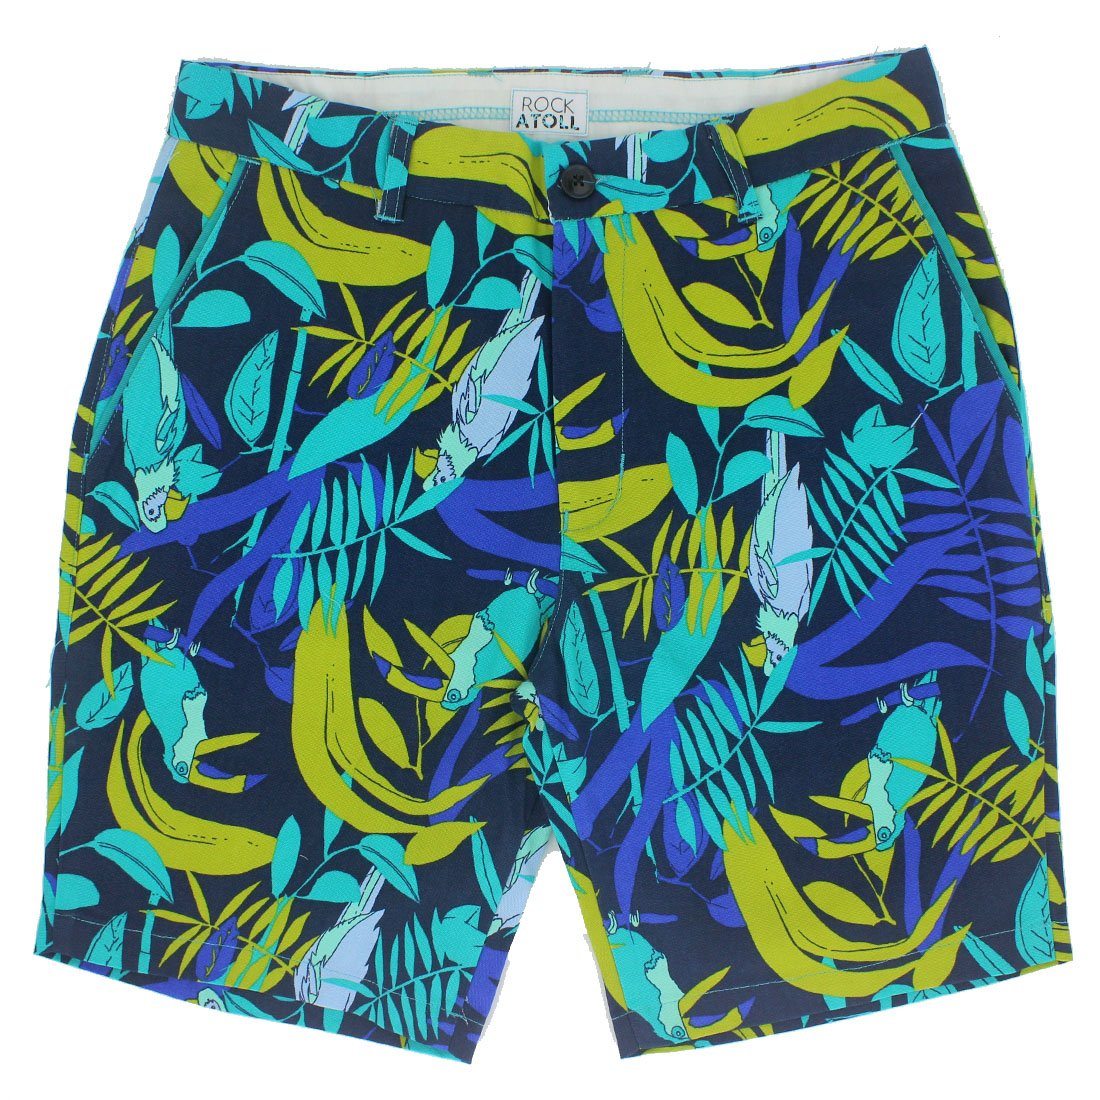 Bird Shorts For Men. Buy Mens Clothing Online. New Style | Rock Atoll